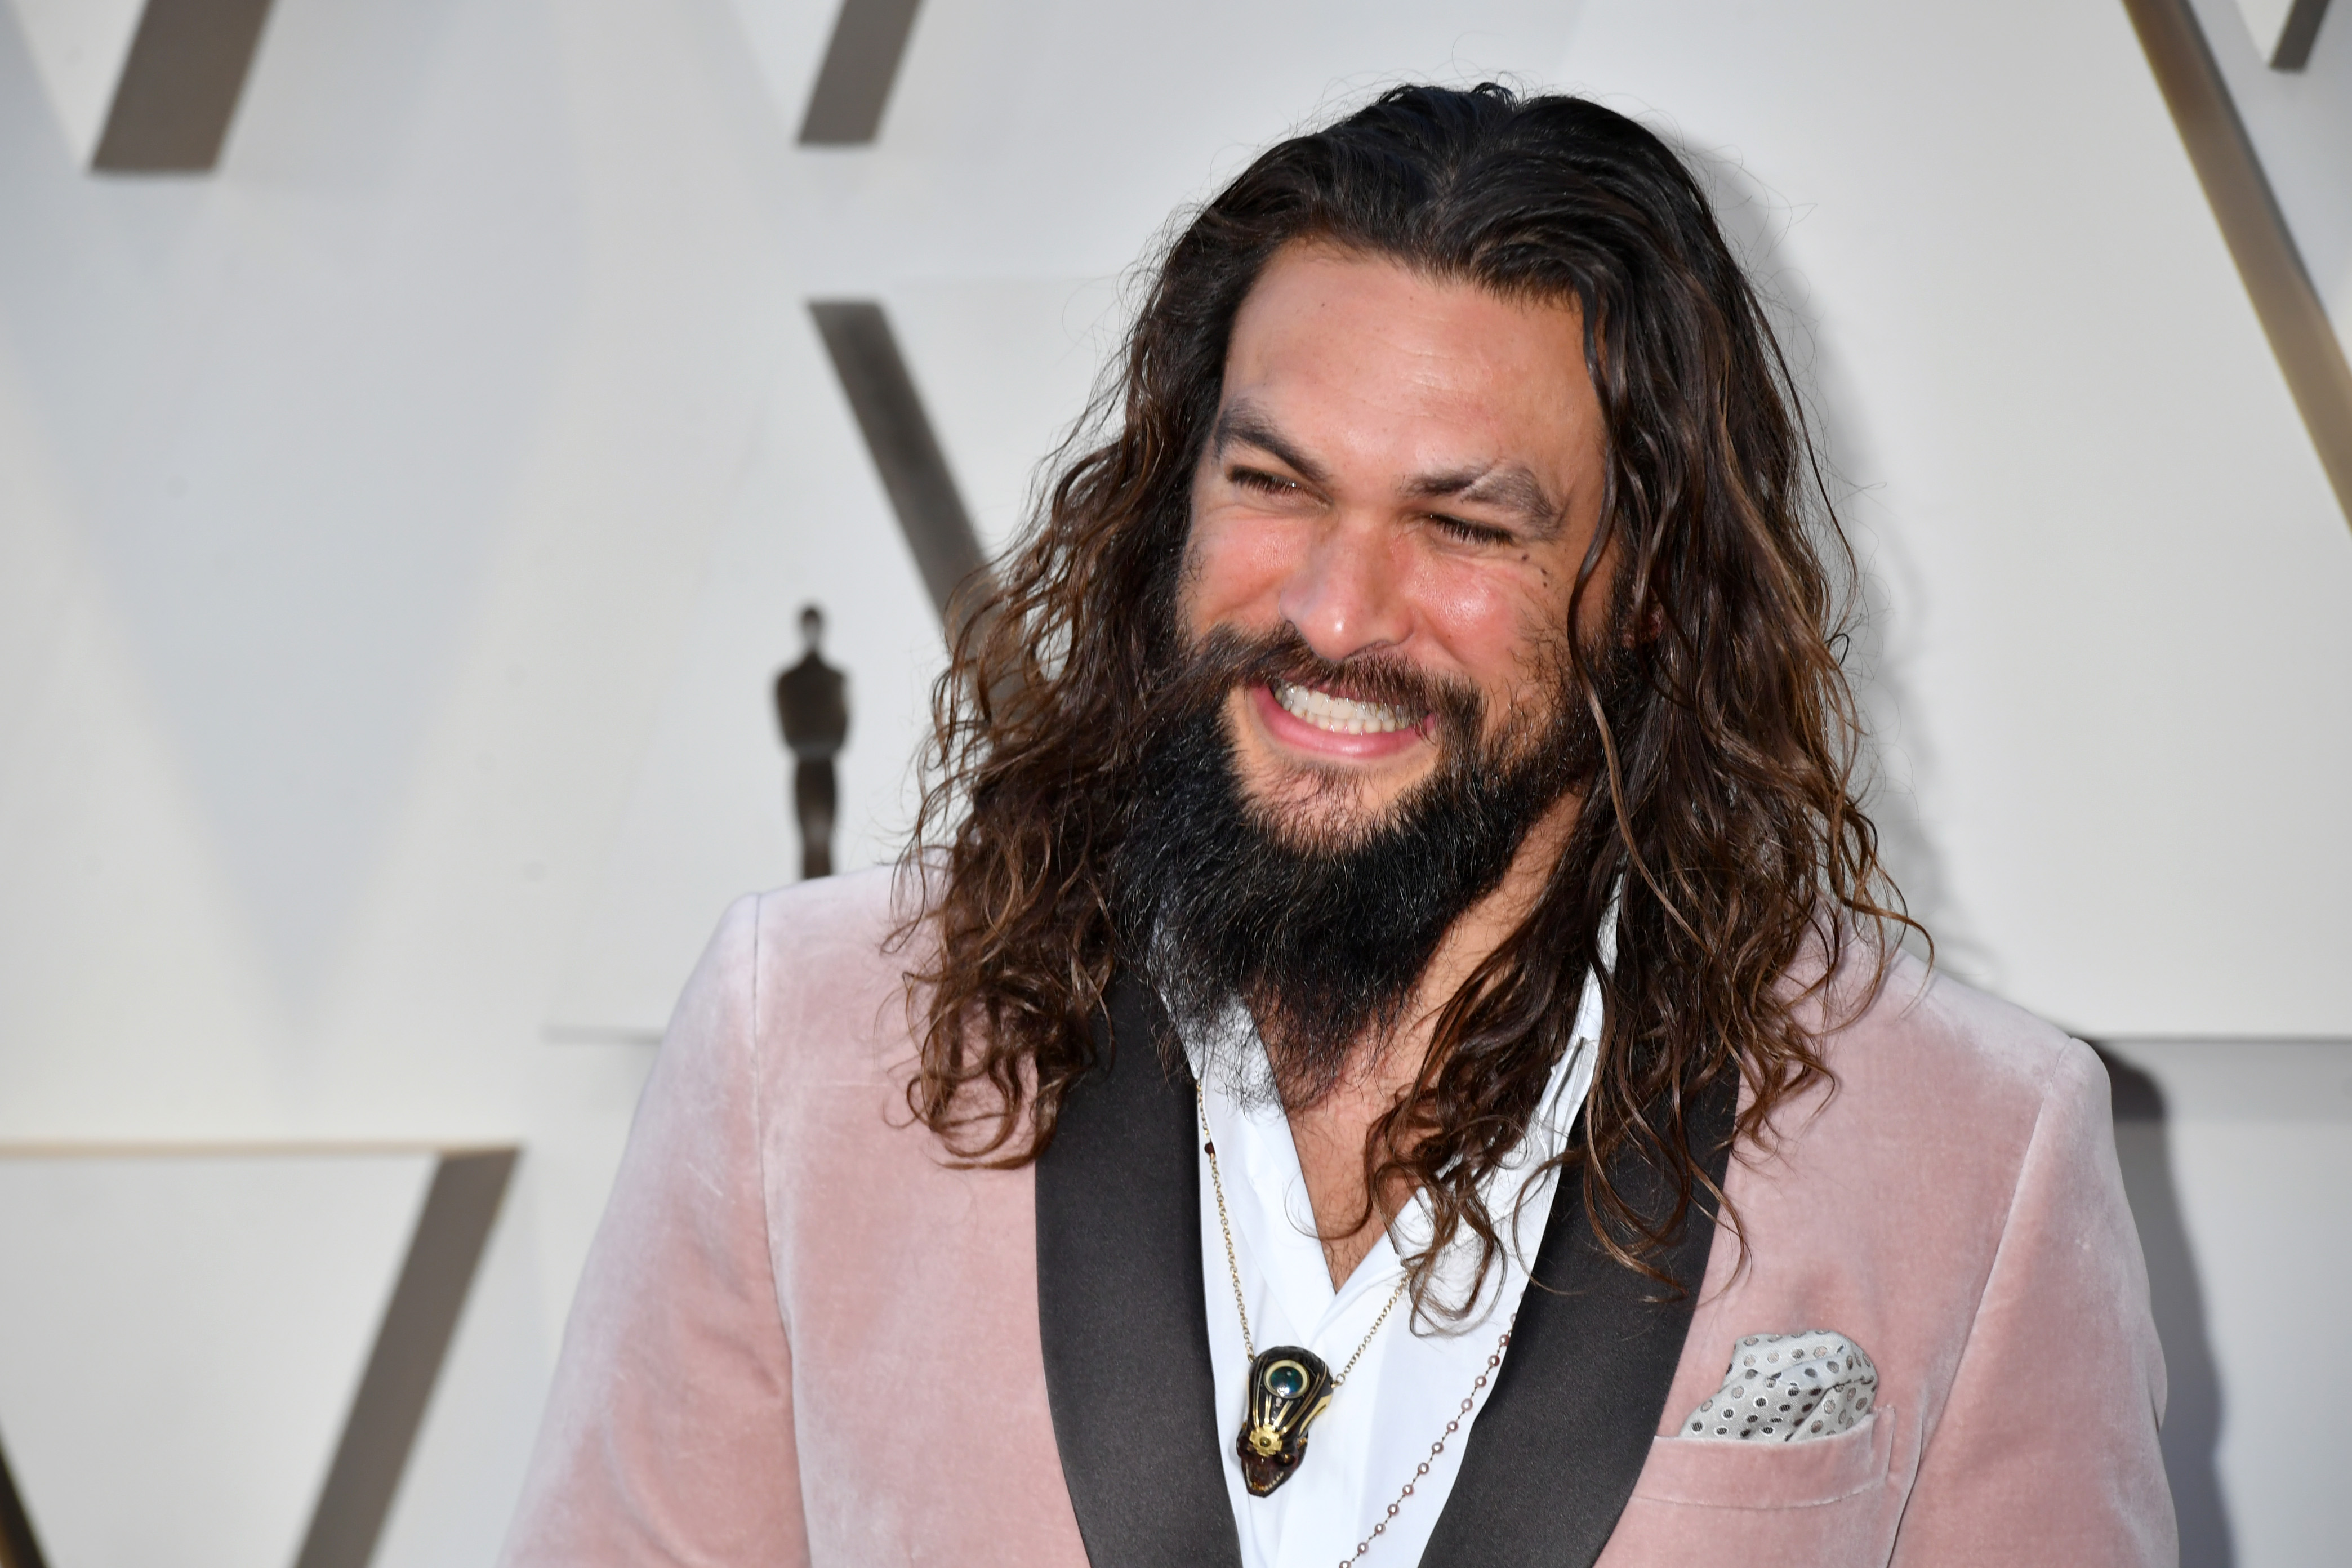 HOLLYWOOD, CA - FEBRUARY 24:  Jason Momoa attends the 91st Annual Academy Awards at Hollywood and Highland on February 24, 2019 in Hollywood, California.  (Photo by Jeff Kravitz/FilmMagic) (Jeff Kravitz—FilmMagic)